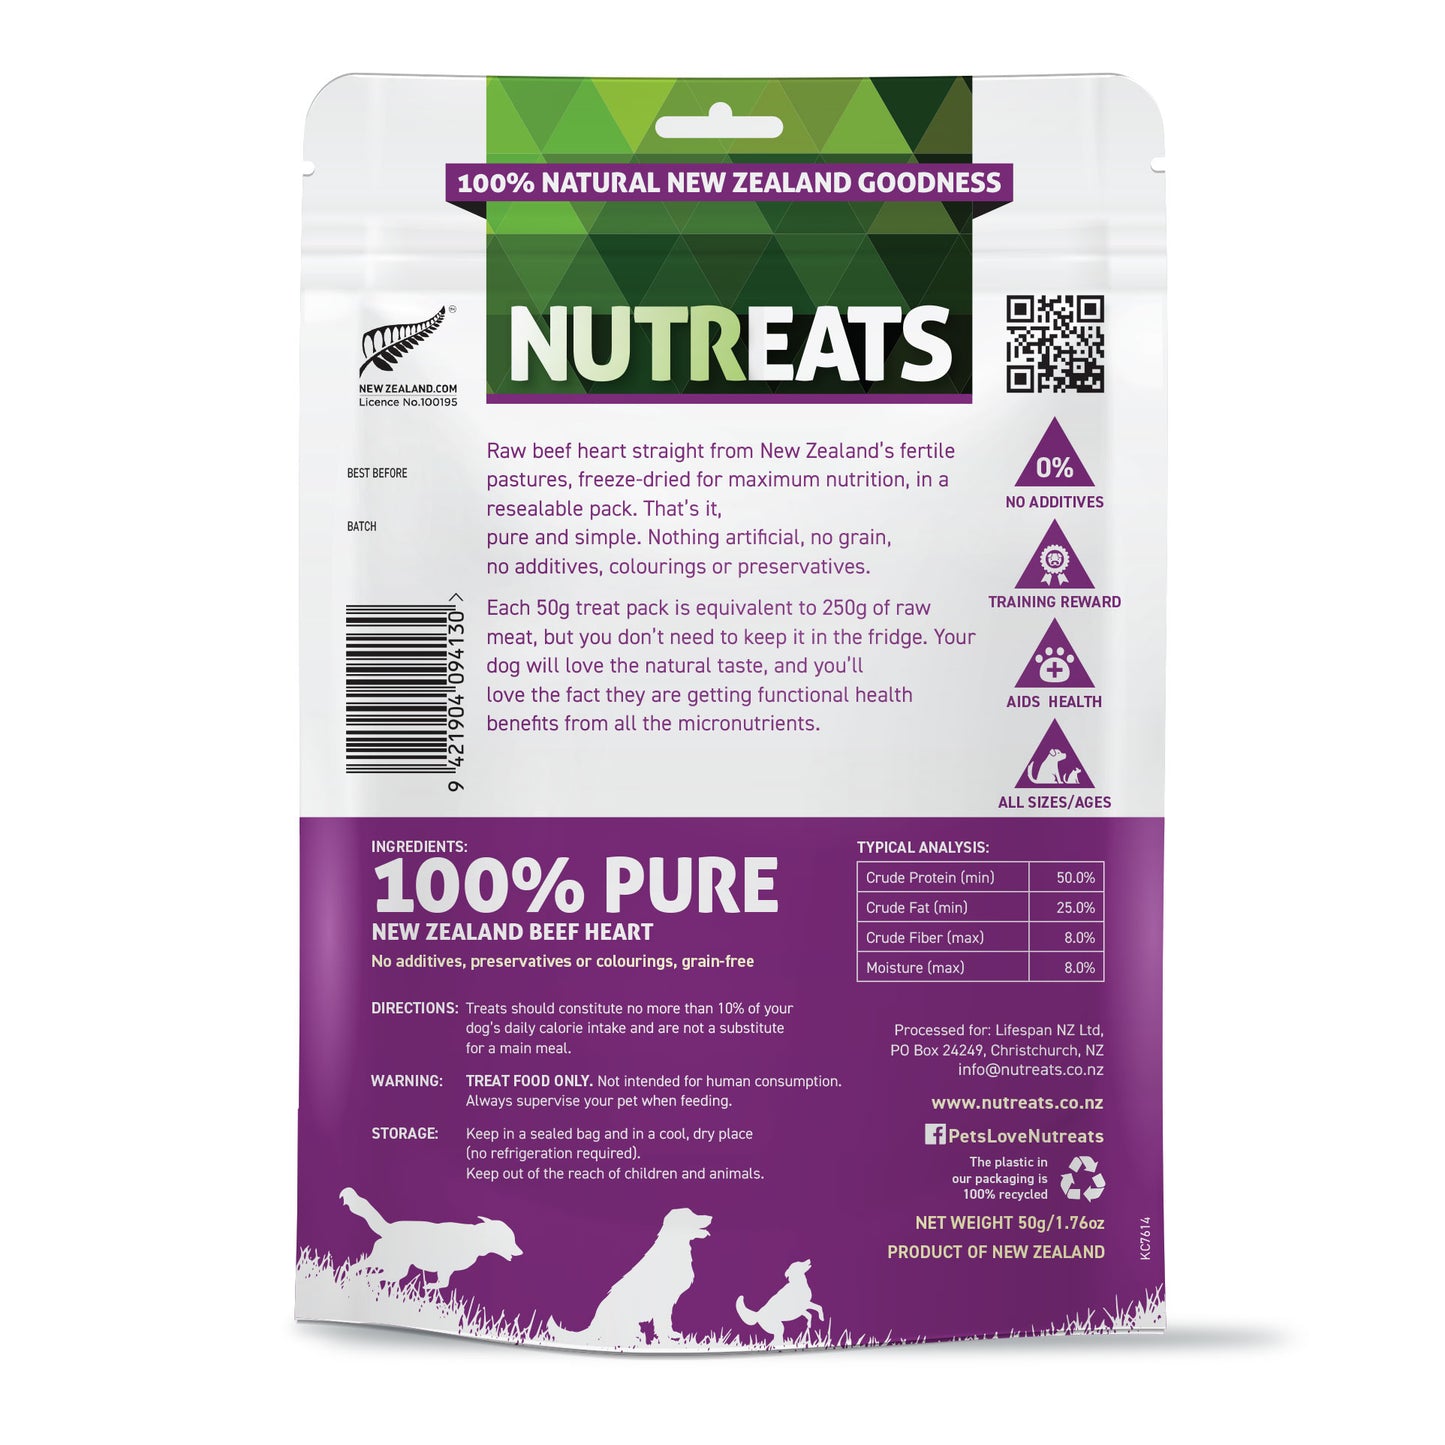 No additives, training reward - beef heart training treat for dogs. 100% natural - Nutreats New Zealand beef heart dog treats for dogs - rich in iron and B vitamins supporting healthy natural tissue repair and great training treats. 100% natural - pure meat treat. Freeze-dried for maximum nutritional value.